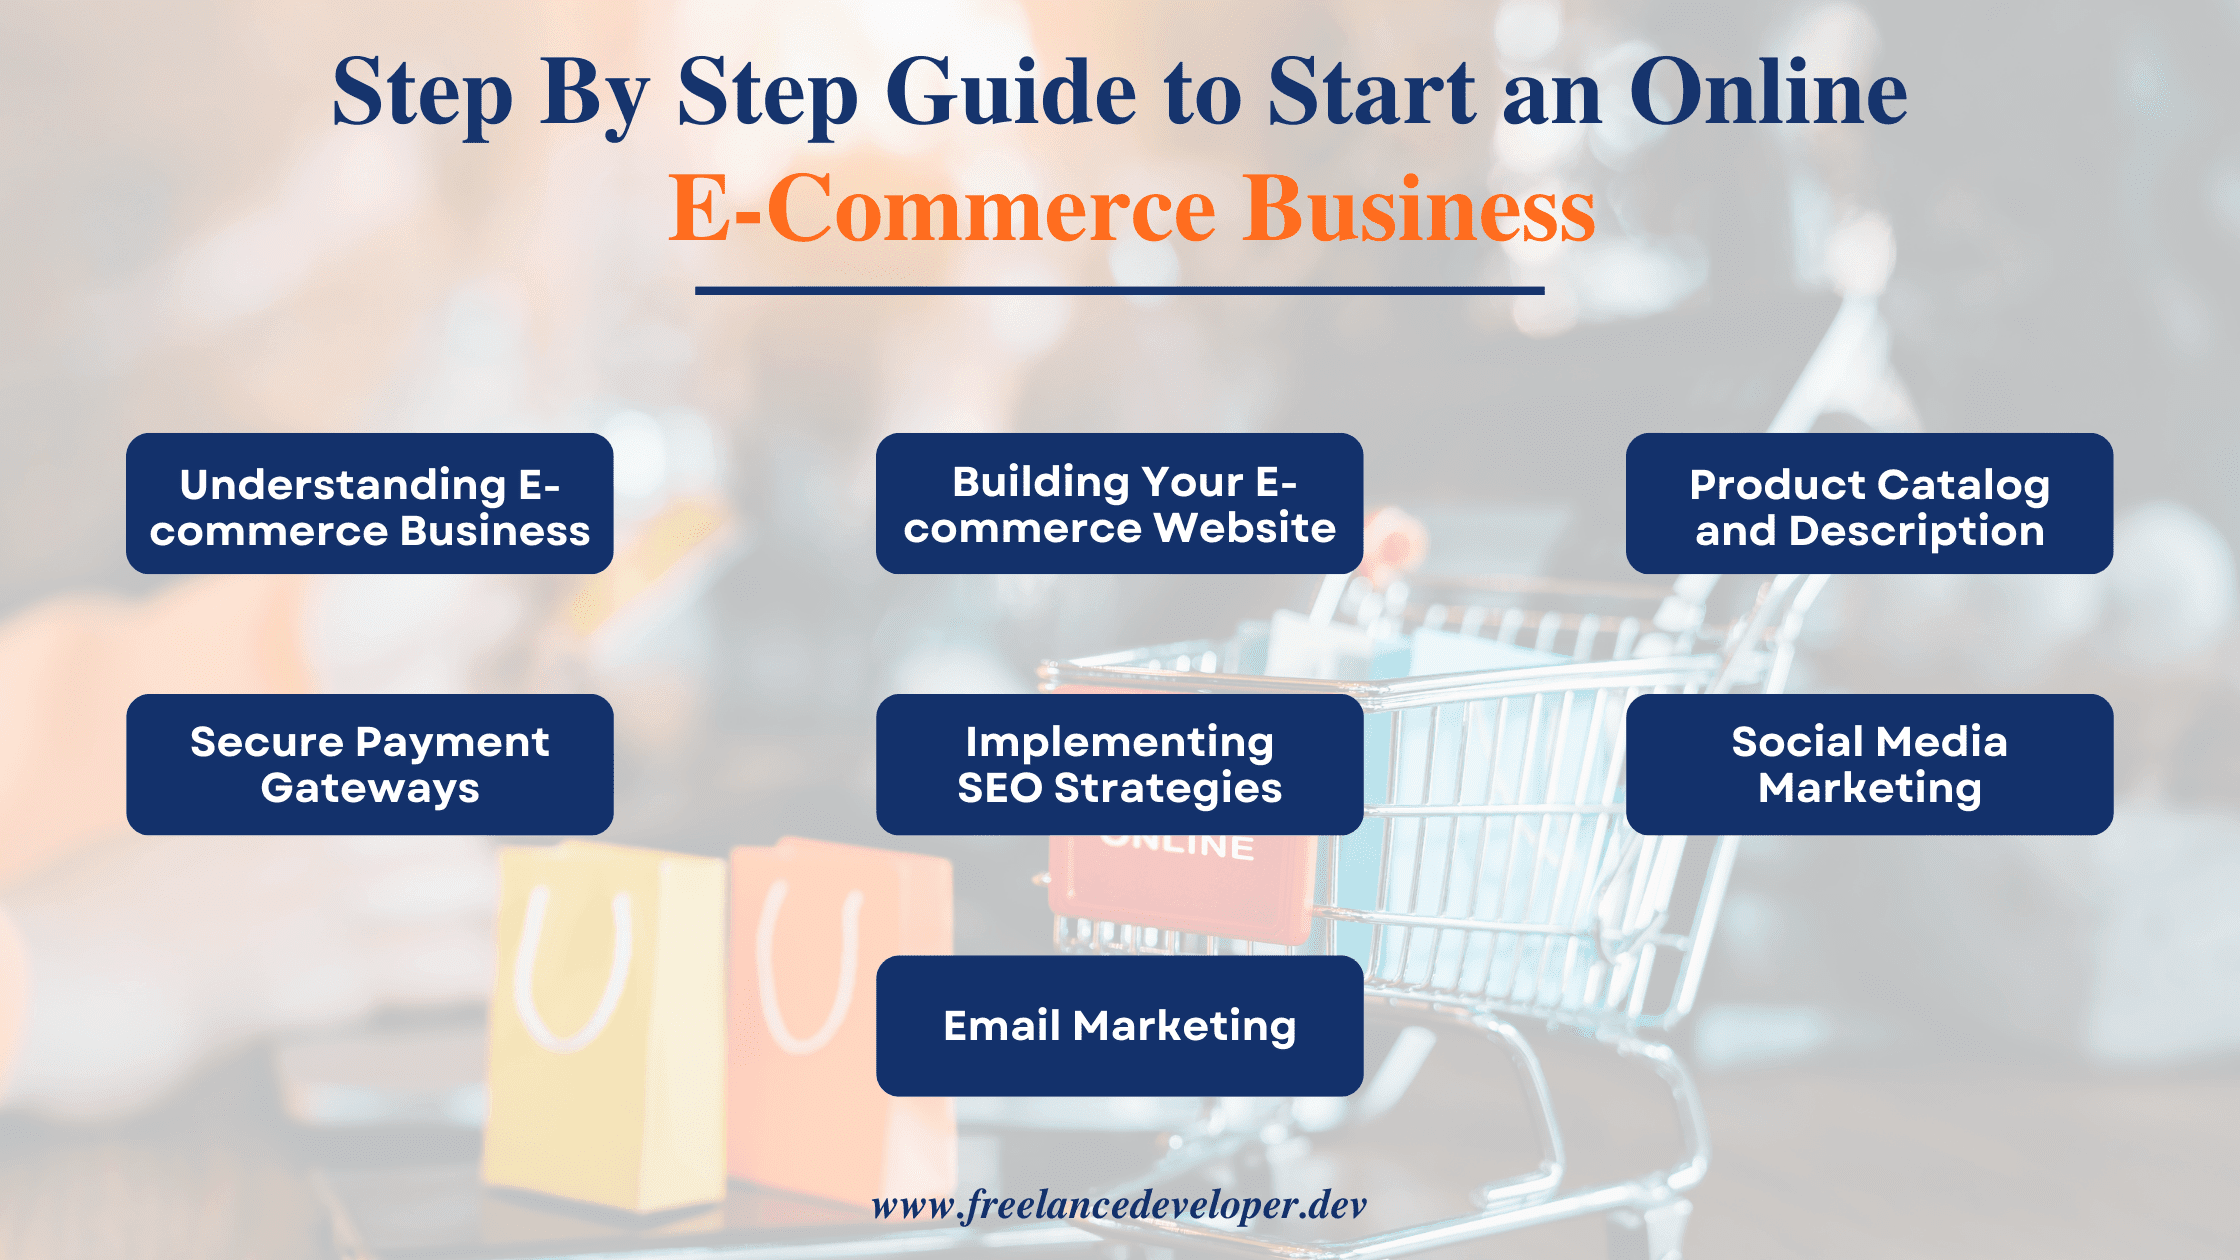 Step By Step Guide - how to start an online e-commerce business